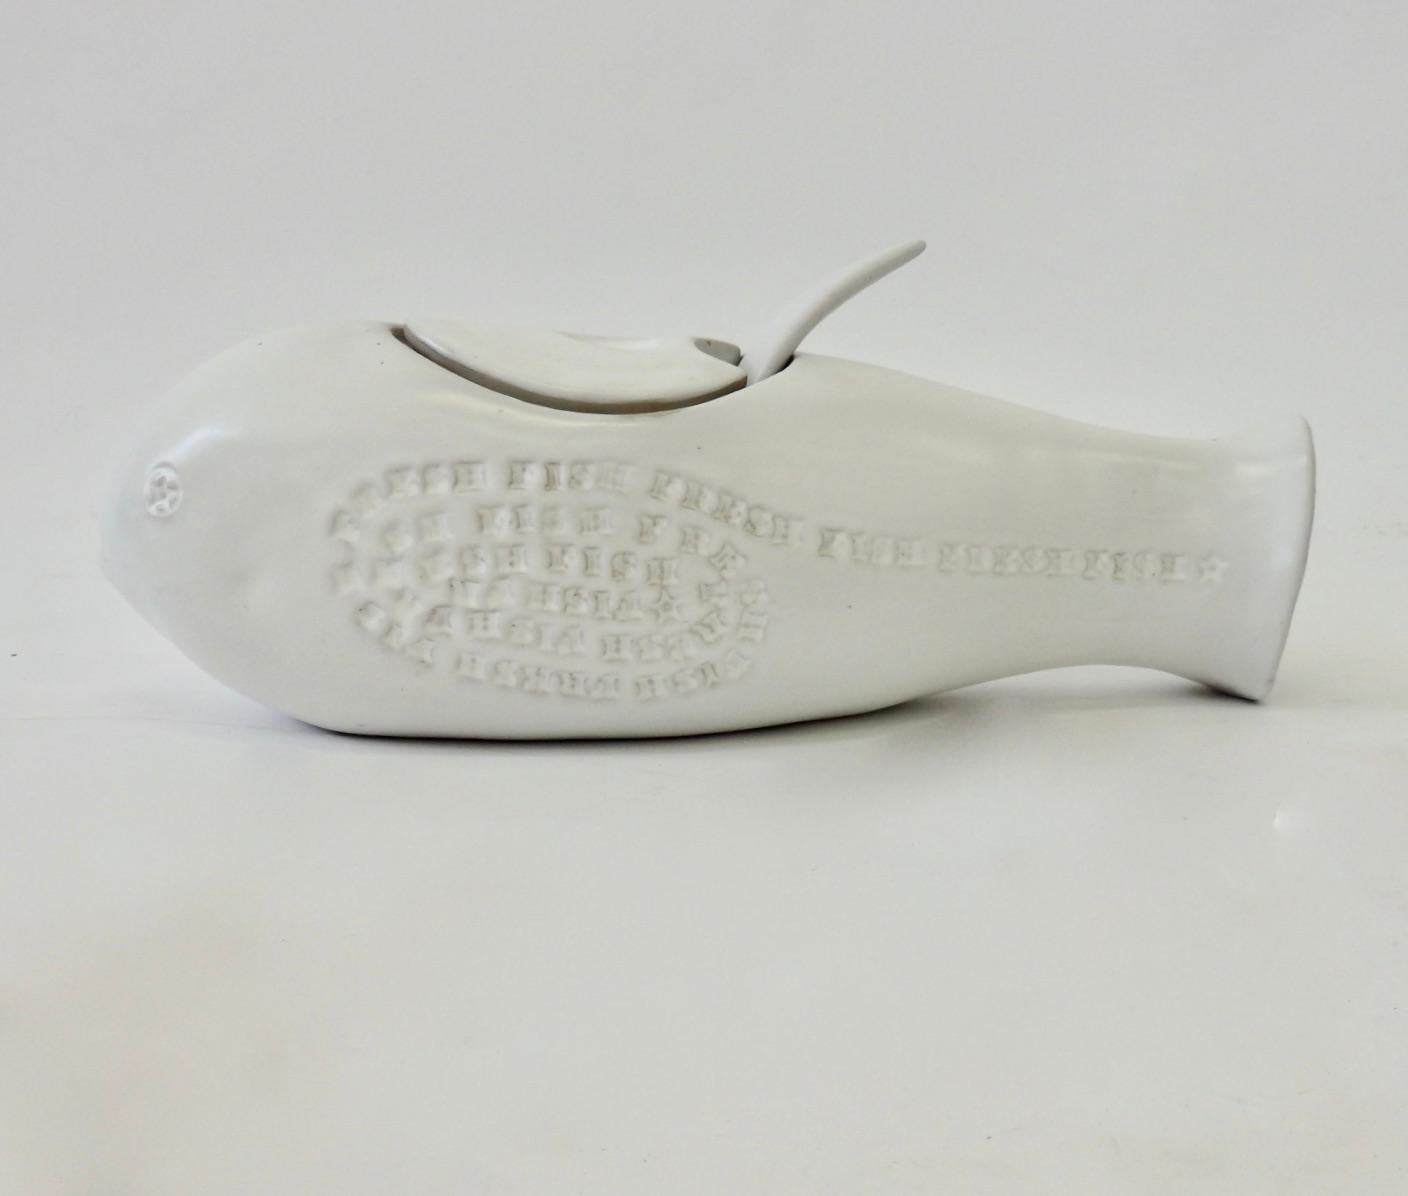 Mid-Century Modern Bennington Pottery Fish Shaped Serving Tureen with Ladle in Matte White Glaze For Sale